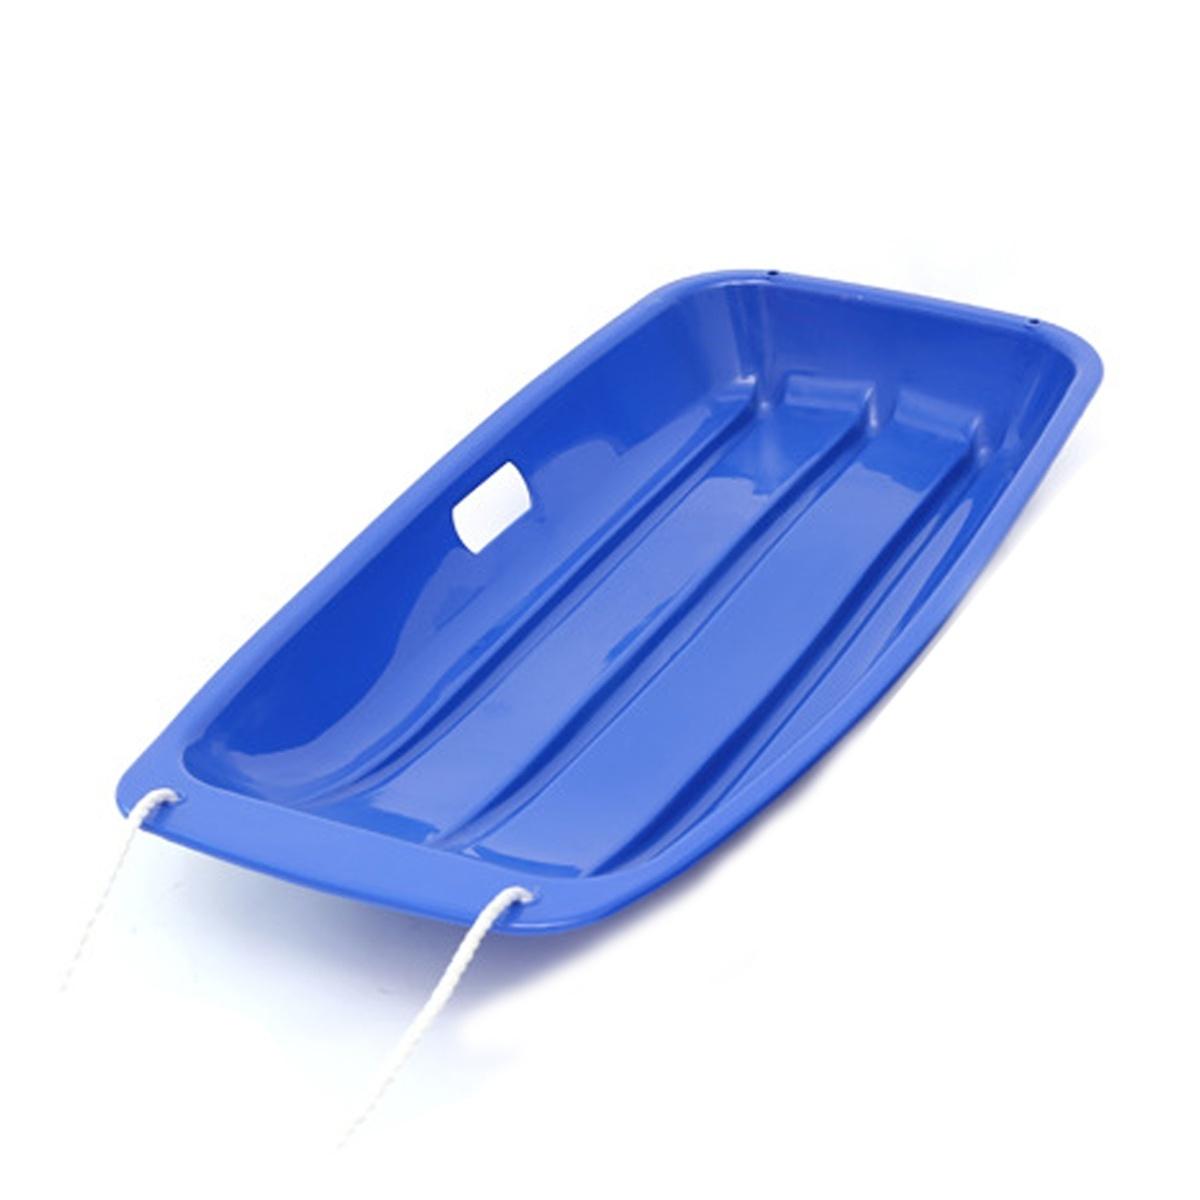 30CM Snow Sled for Adults and Kids Color : Blue 43 Sand Sled Boat Sleigh100 Toboggan Sled with Grass Skiing Snowboard Boat Sleigh Brakes & Anti-Slip Foot Panels 